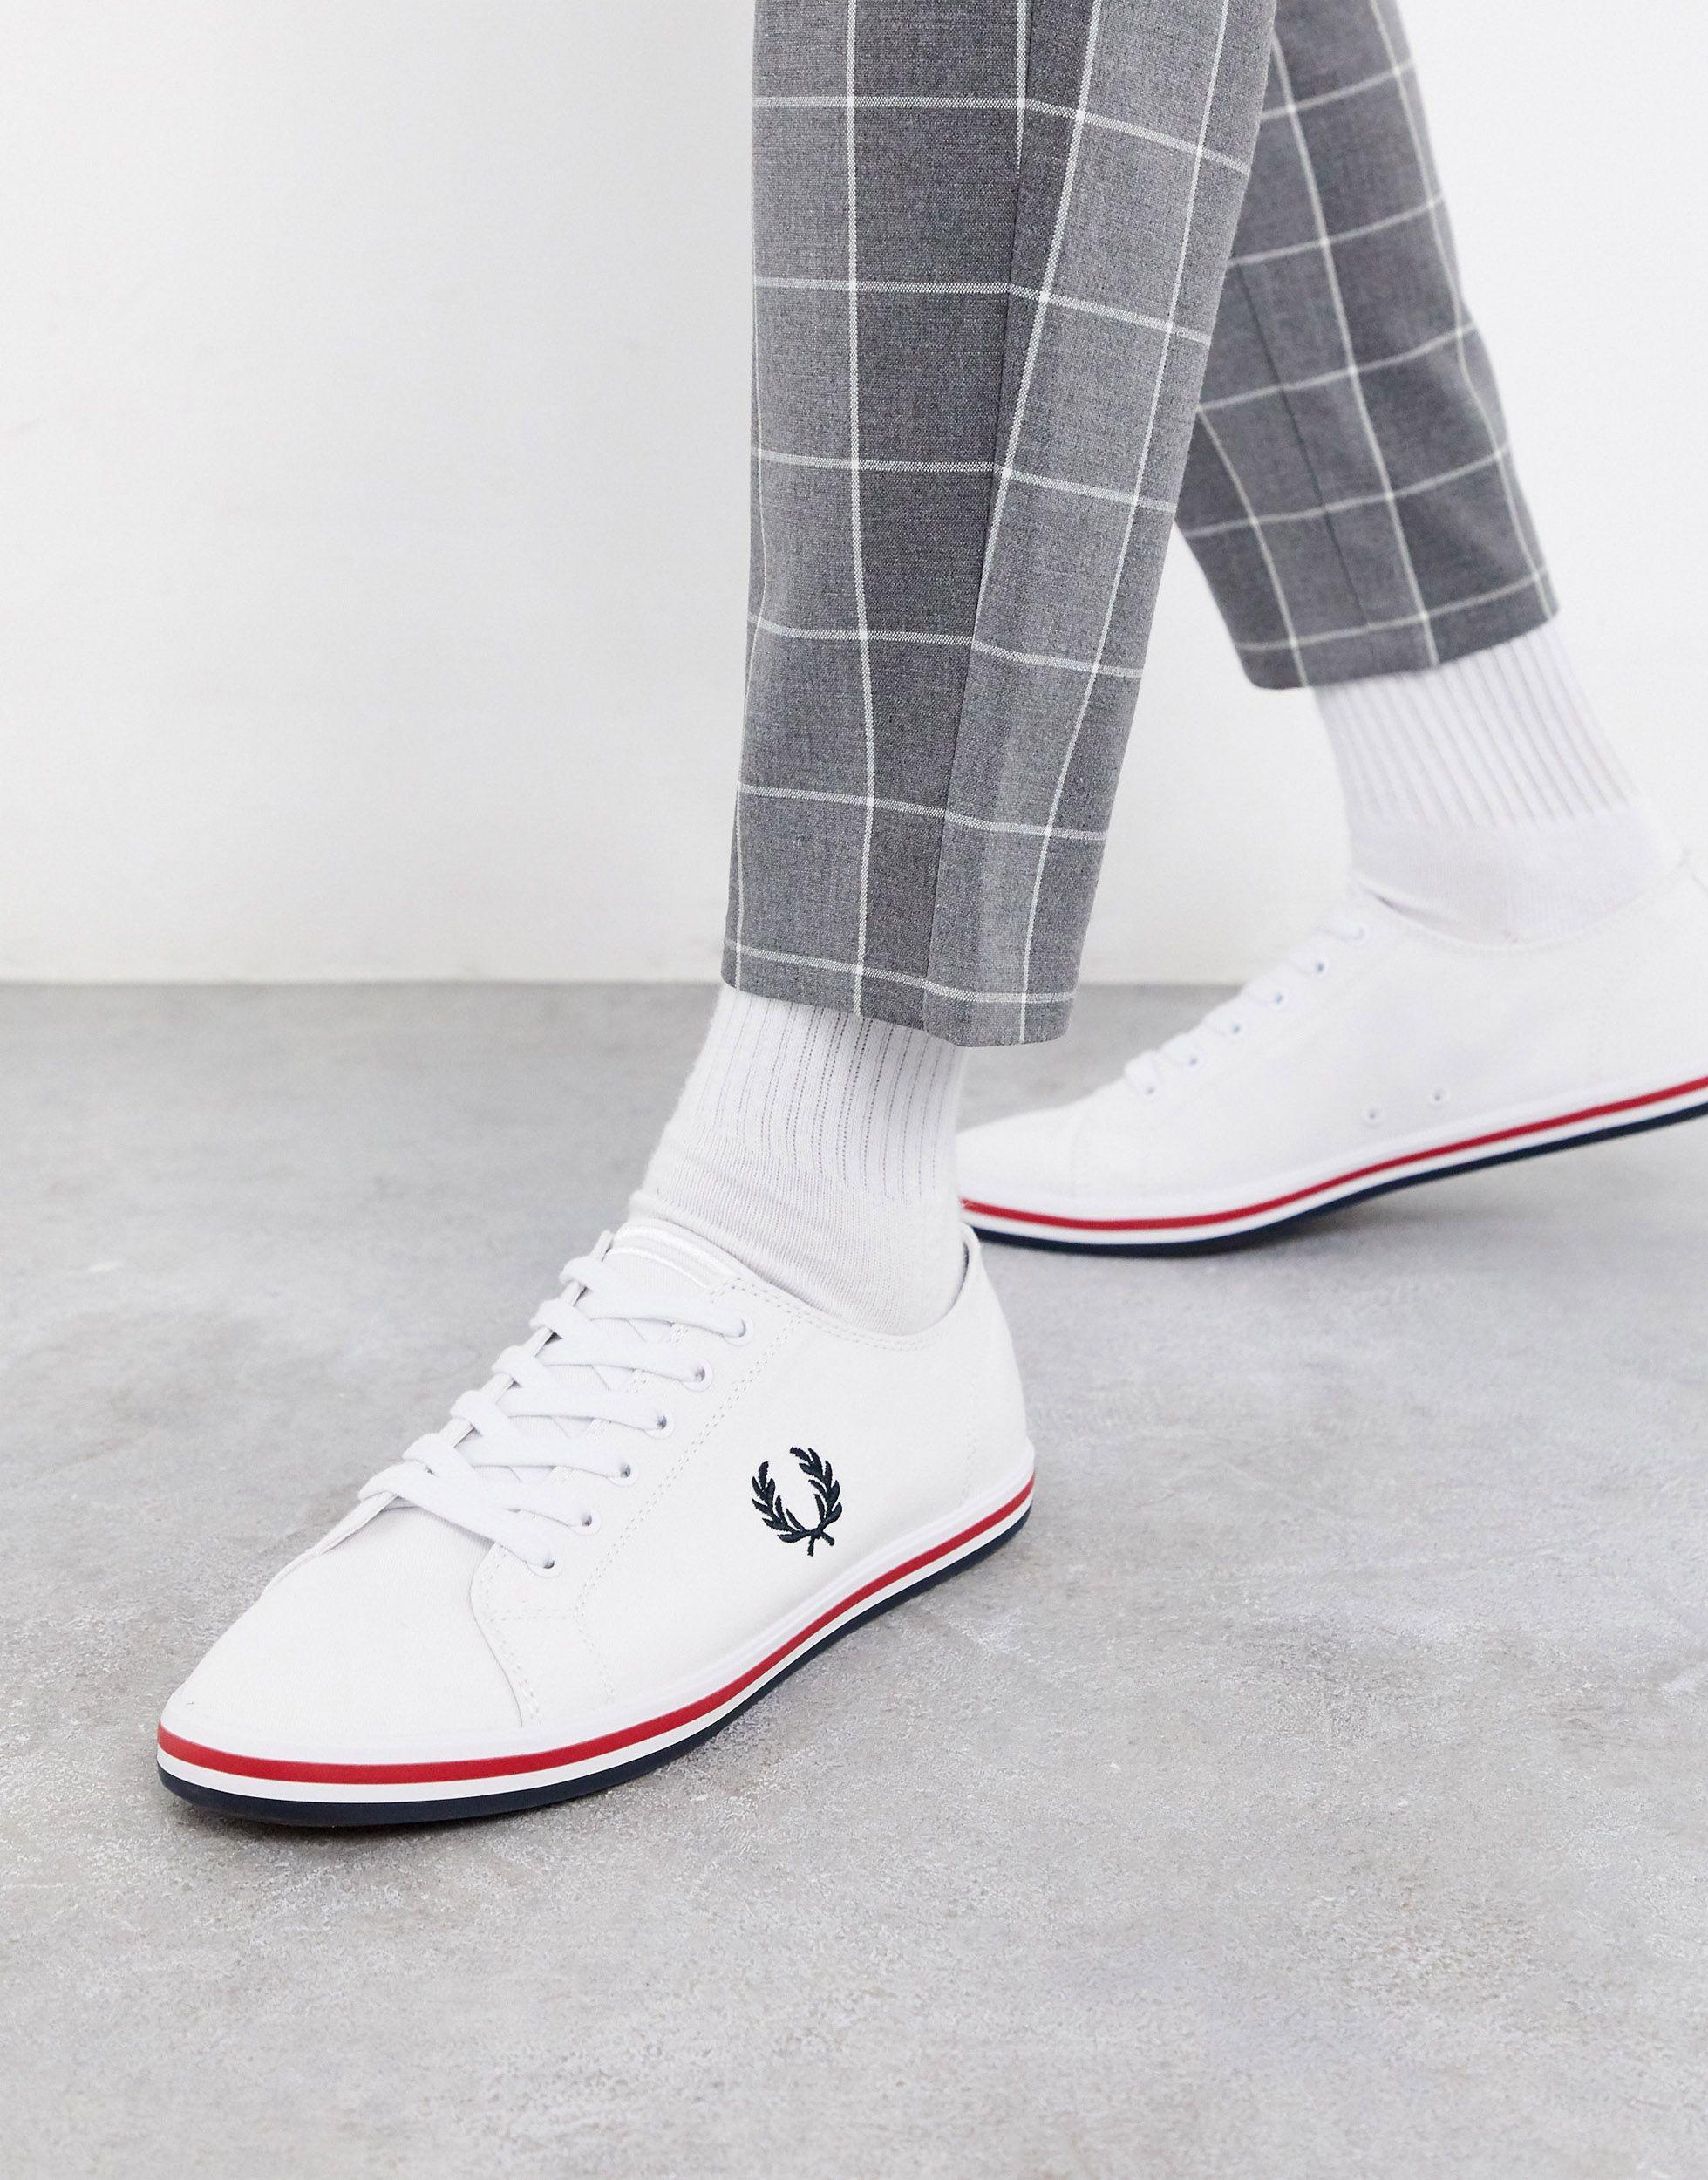 Мужские тонкие кроссовки. Fred Perry обувь. Fred Perry Kingston Twill Tipped.